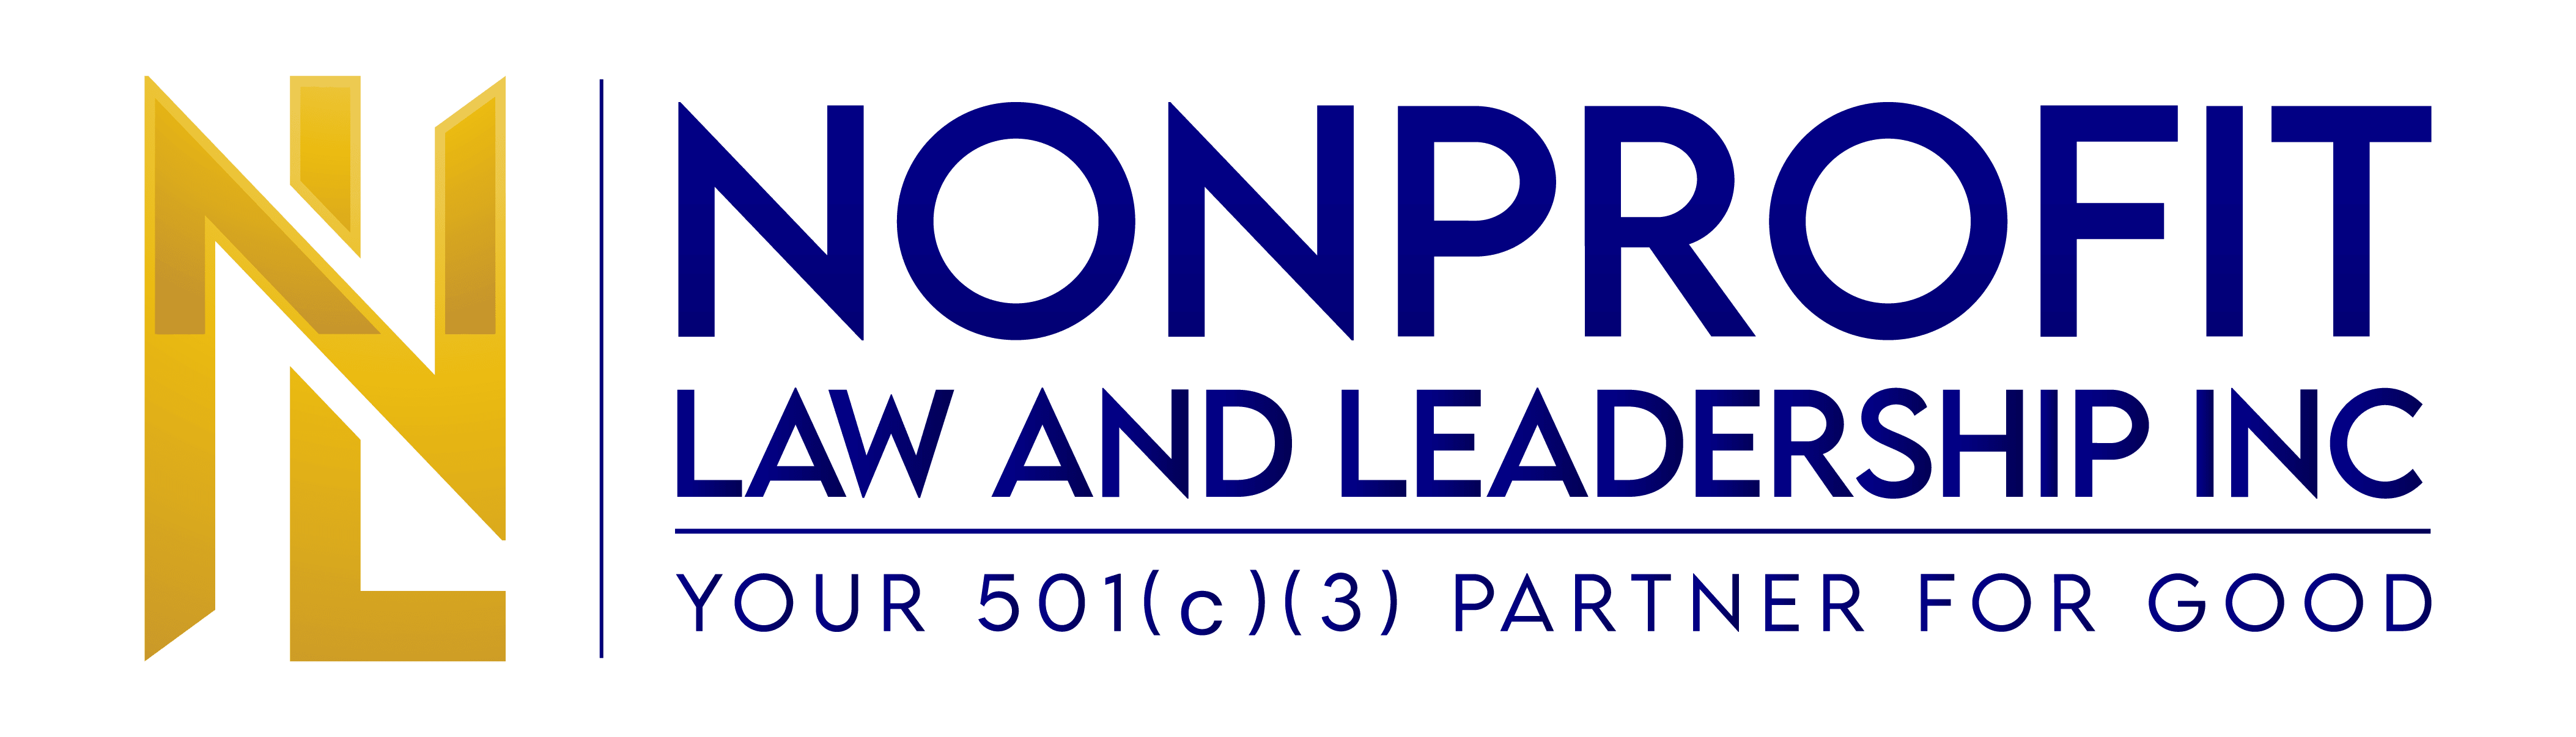 Nonprofit Law and Leadership Inc.